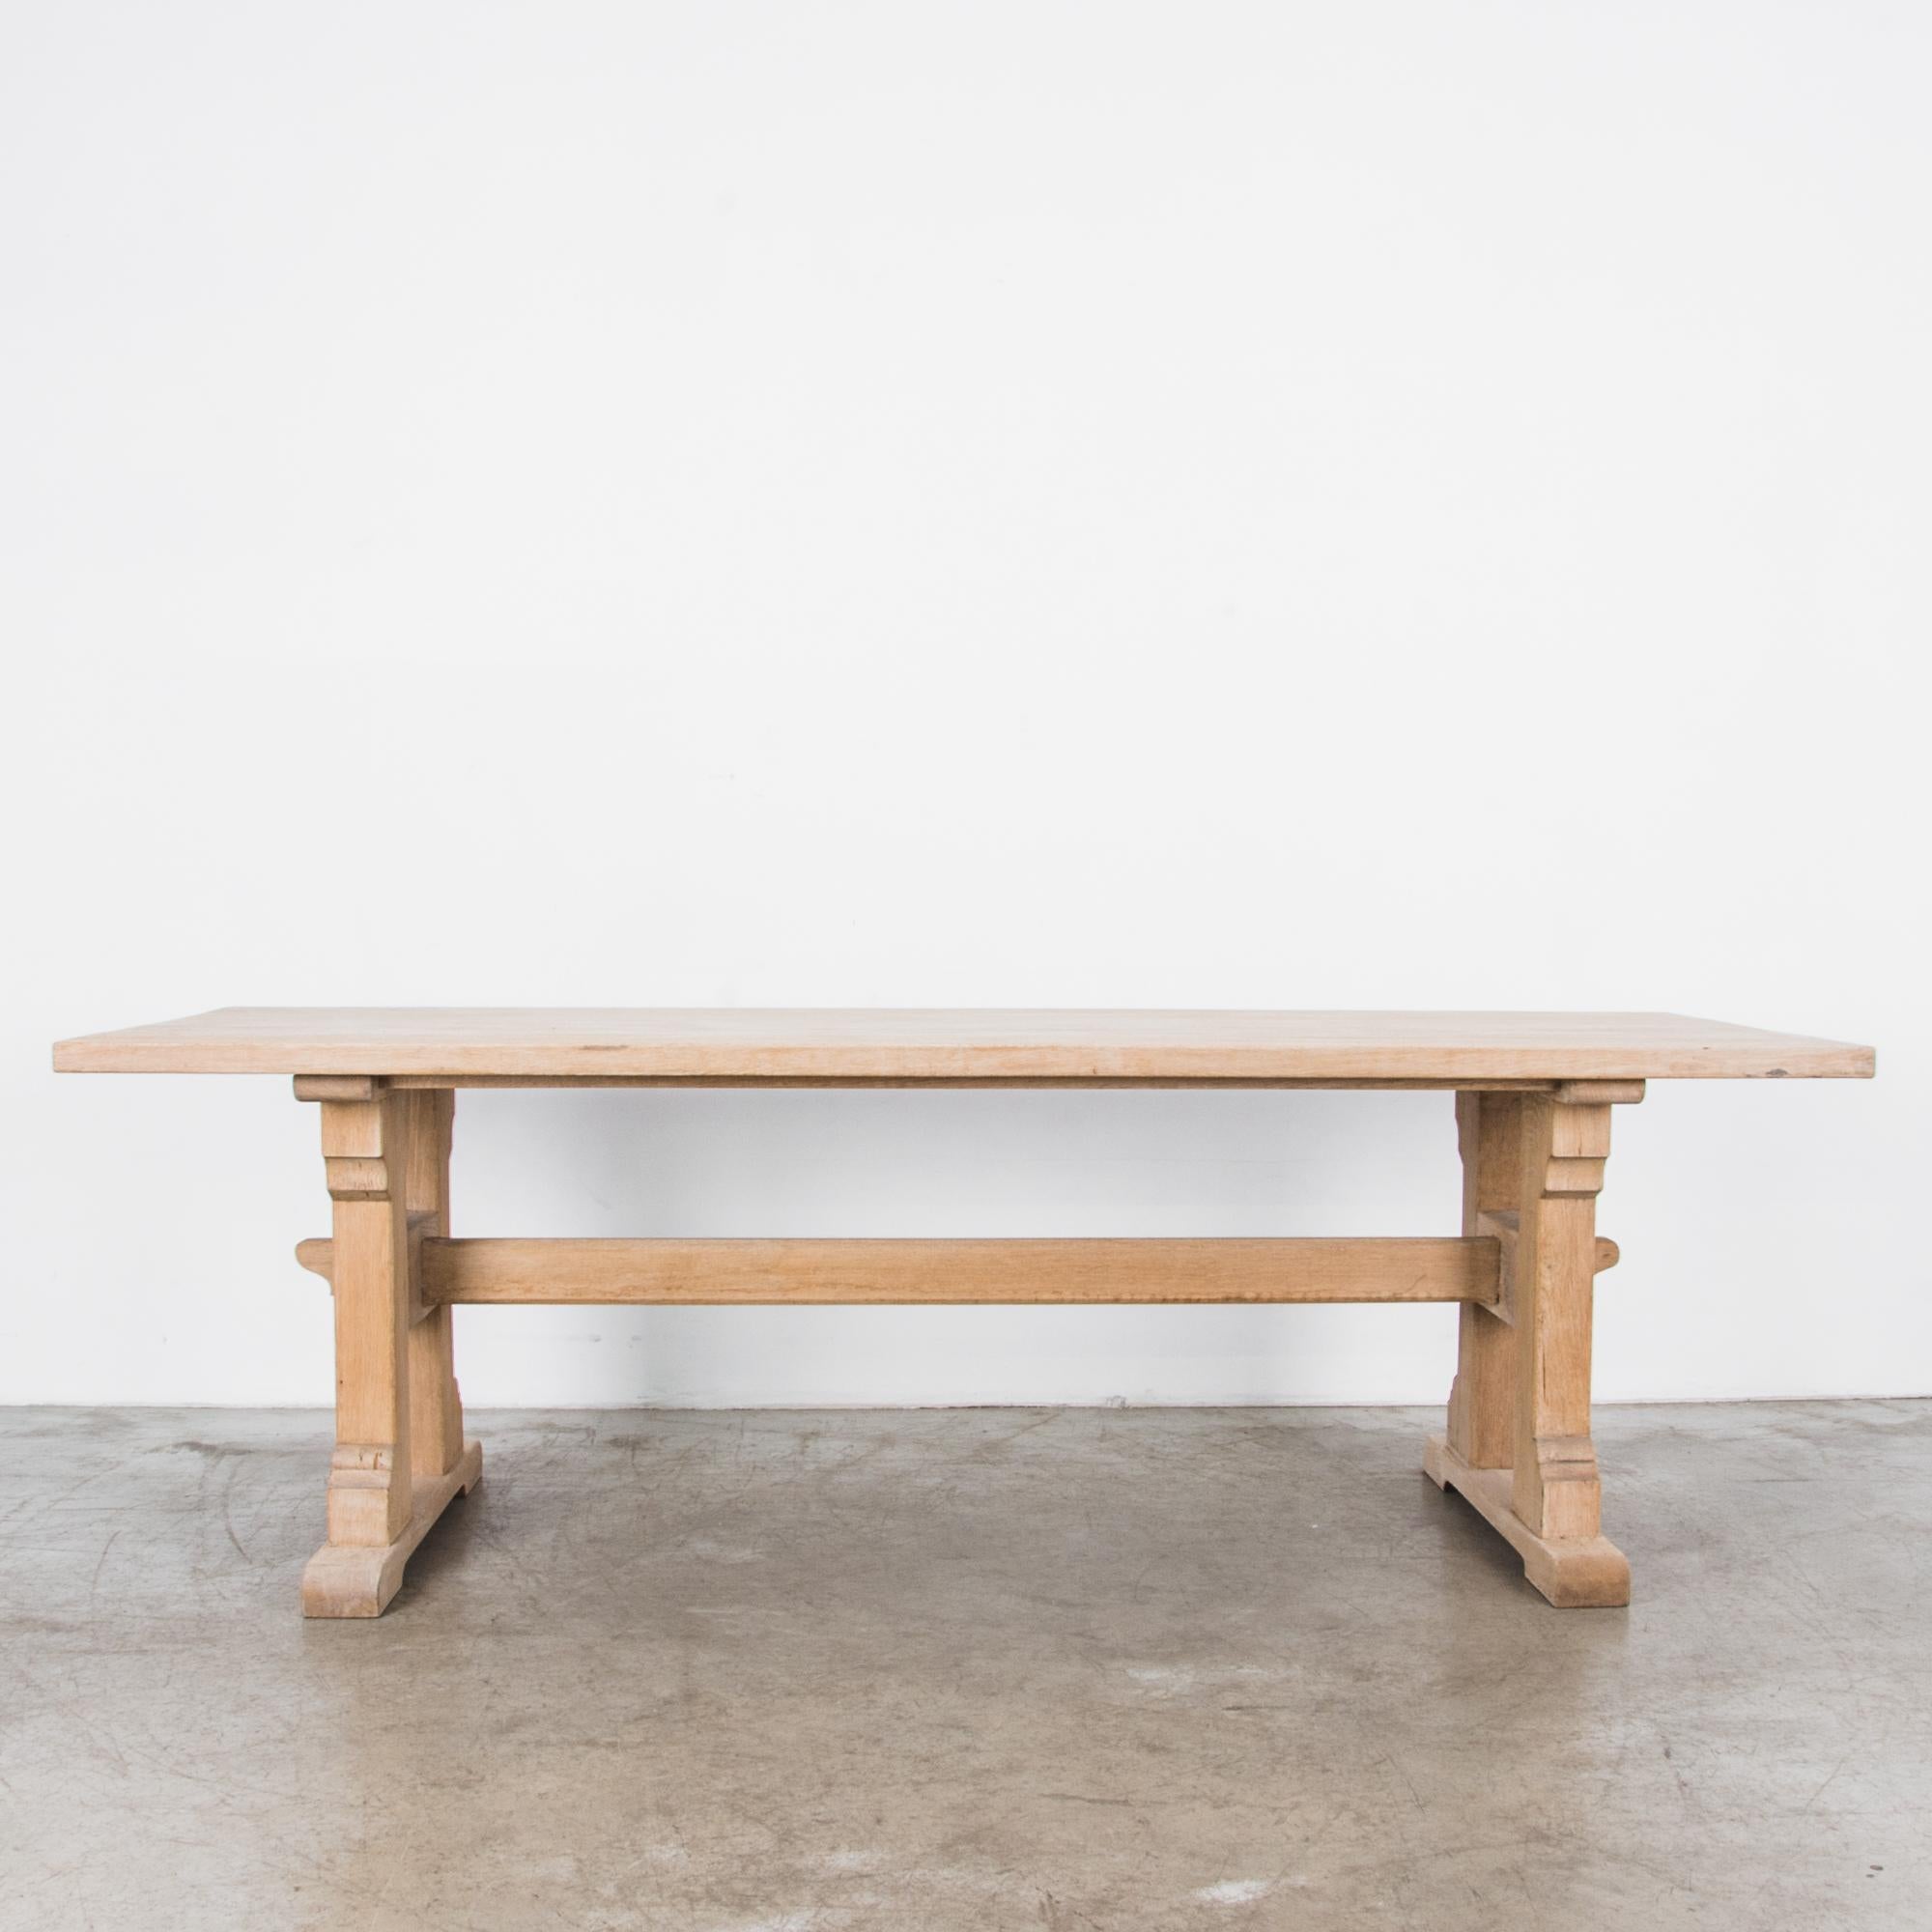 An oak trestle table from Belgium, circa 1950. A striking H-shaped leg construction atop a pair of rounded braces supports a long tabletop, measures: 95”. The legs are joined by a trestle and held in place with wooden pins, a design that is both